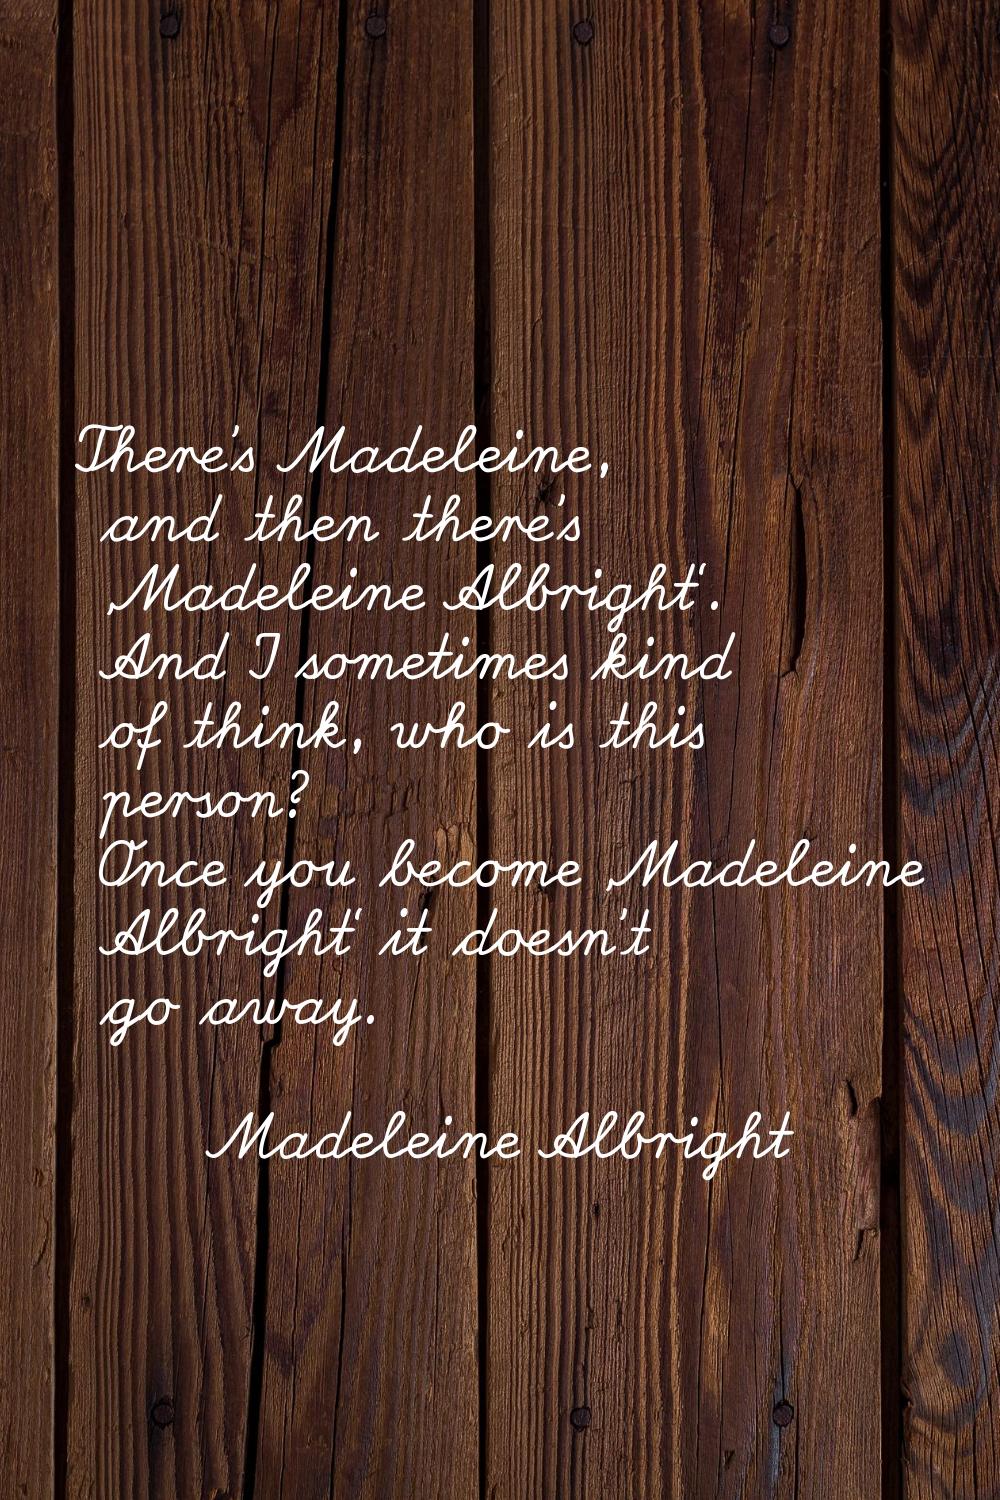 There's Madeleine, and then there's 'Madeleine Albright'. And I sometimes kind of think, who is thi